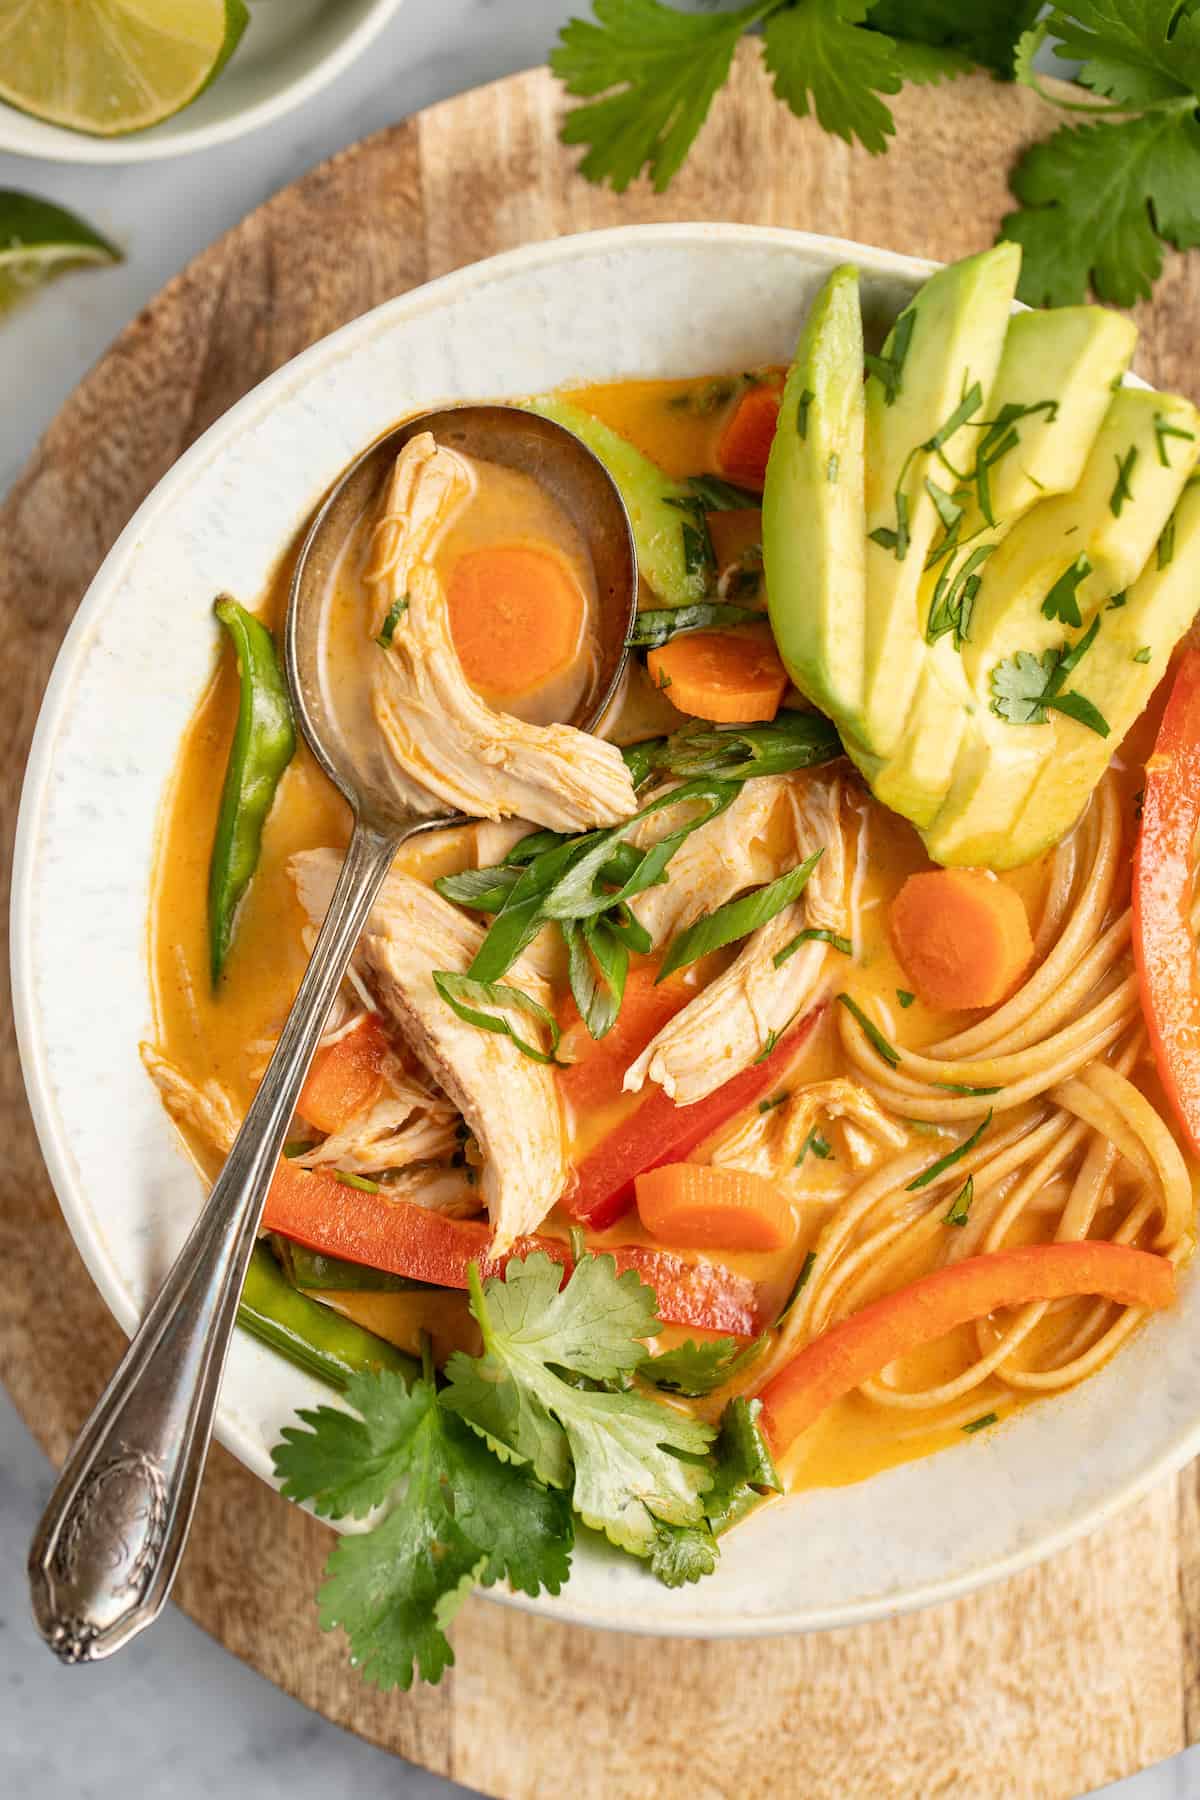 thai chicken noodle soup with an orange colored broth, rice noodles, avocados, and fresh herbs with a large metal spoon